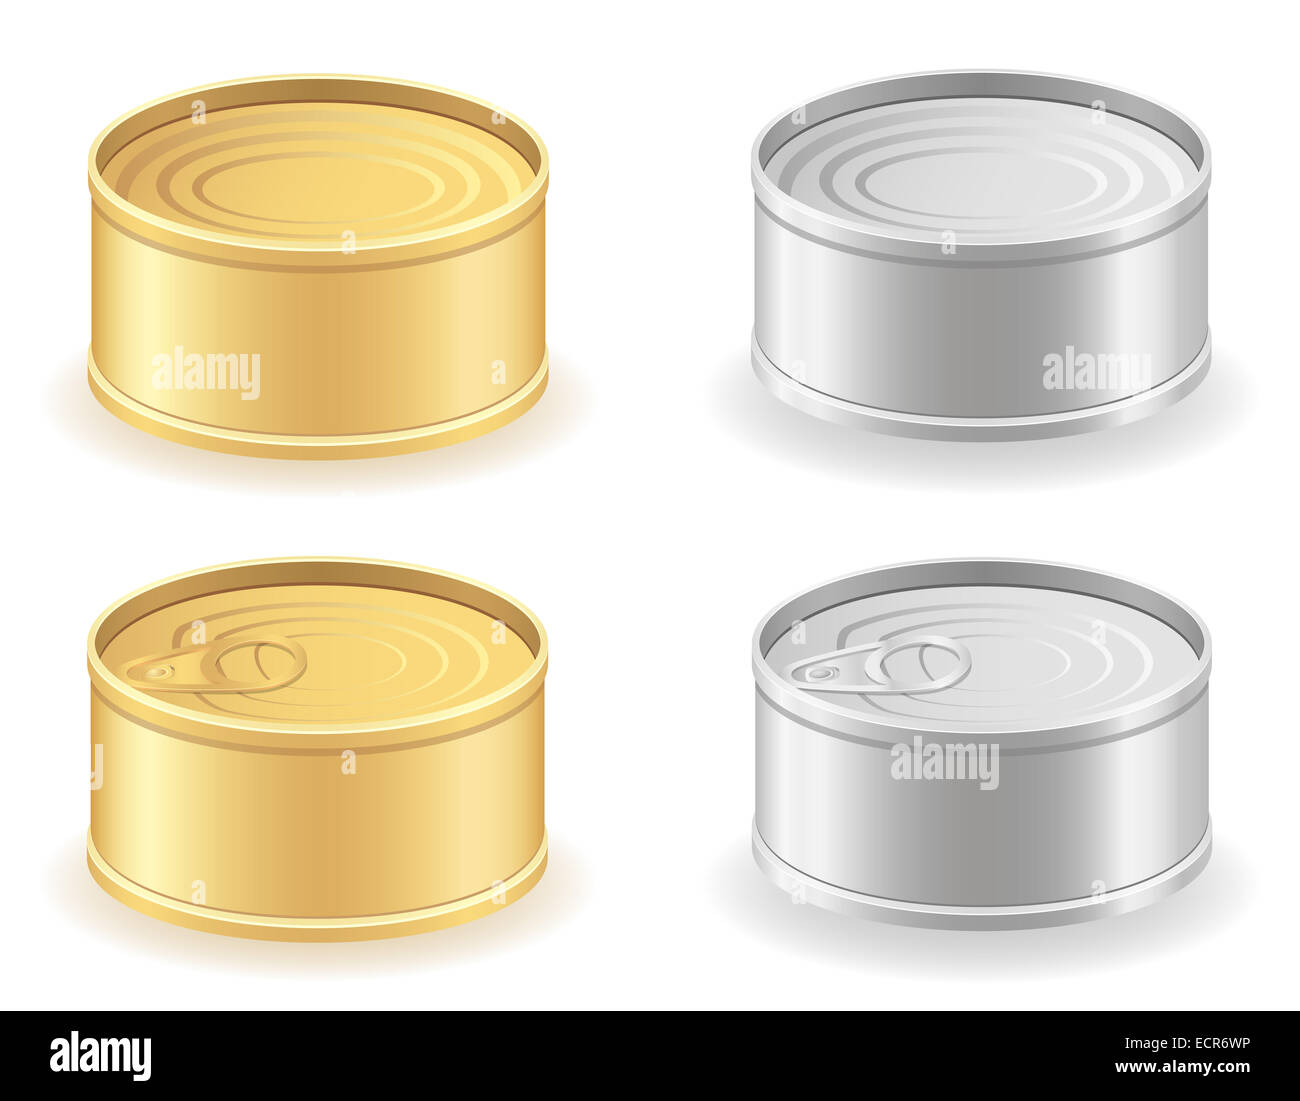 metal tin can set icons illustration isolated on white background Stock Photo